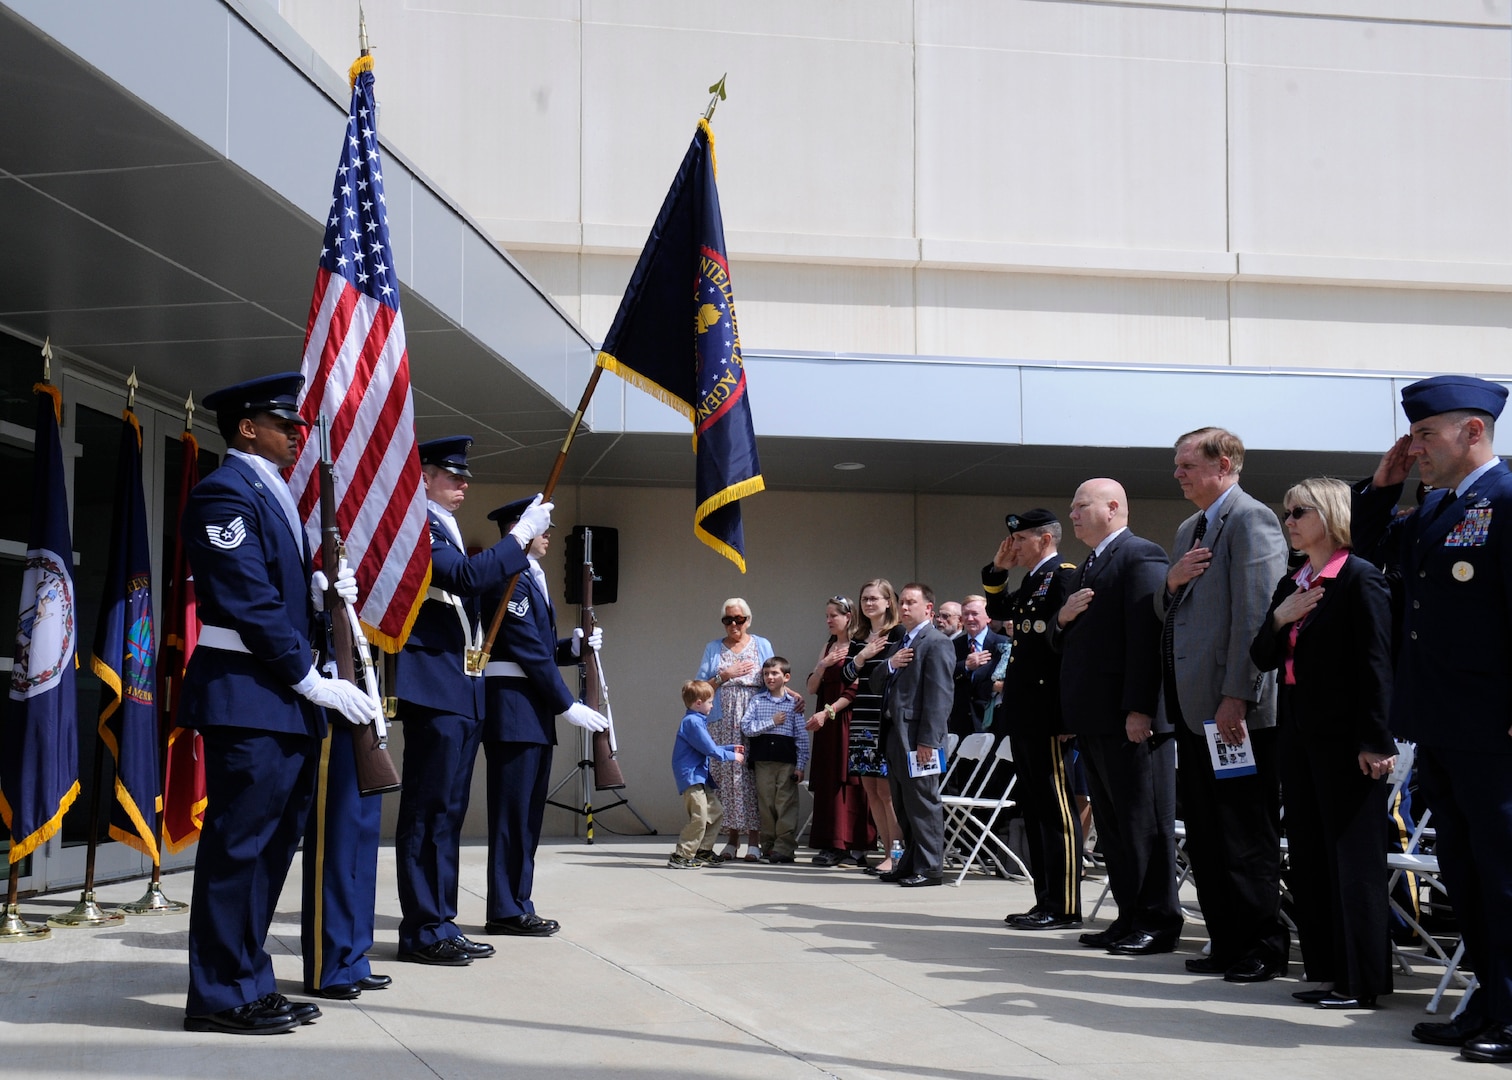 The family of the late Col. James N. Rowe as well as DIA leadership stand for the presentation of the colors during a building dedication ceremony in honor of Rowe at the DIA Field Support Activity Rivanna Station in Charlottesville, Va.